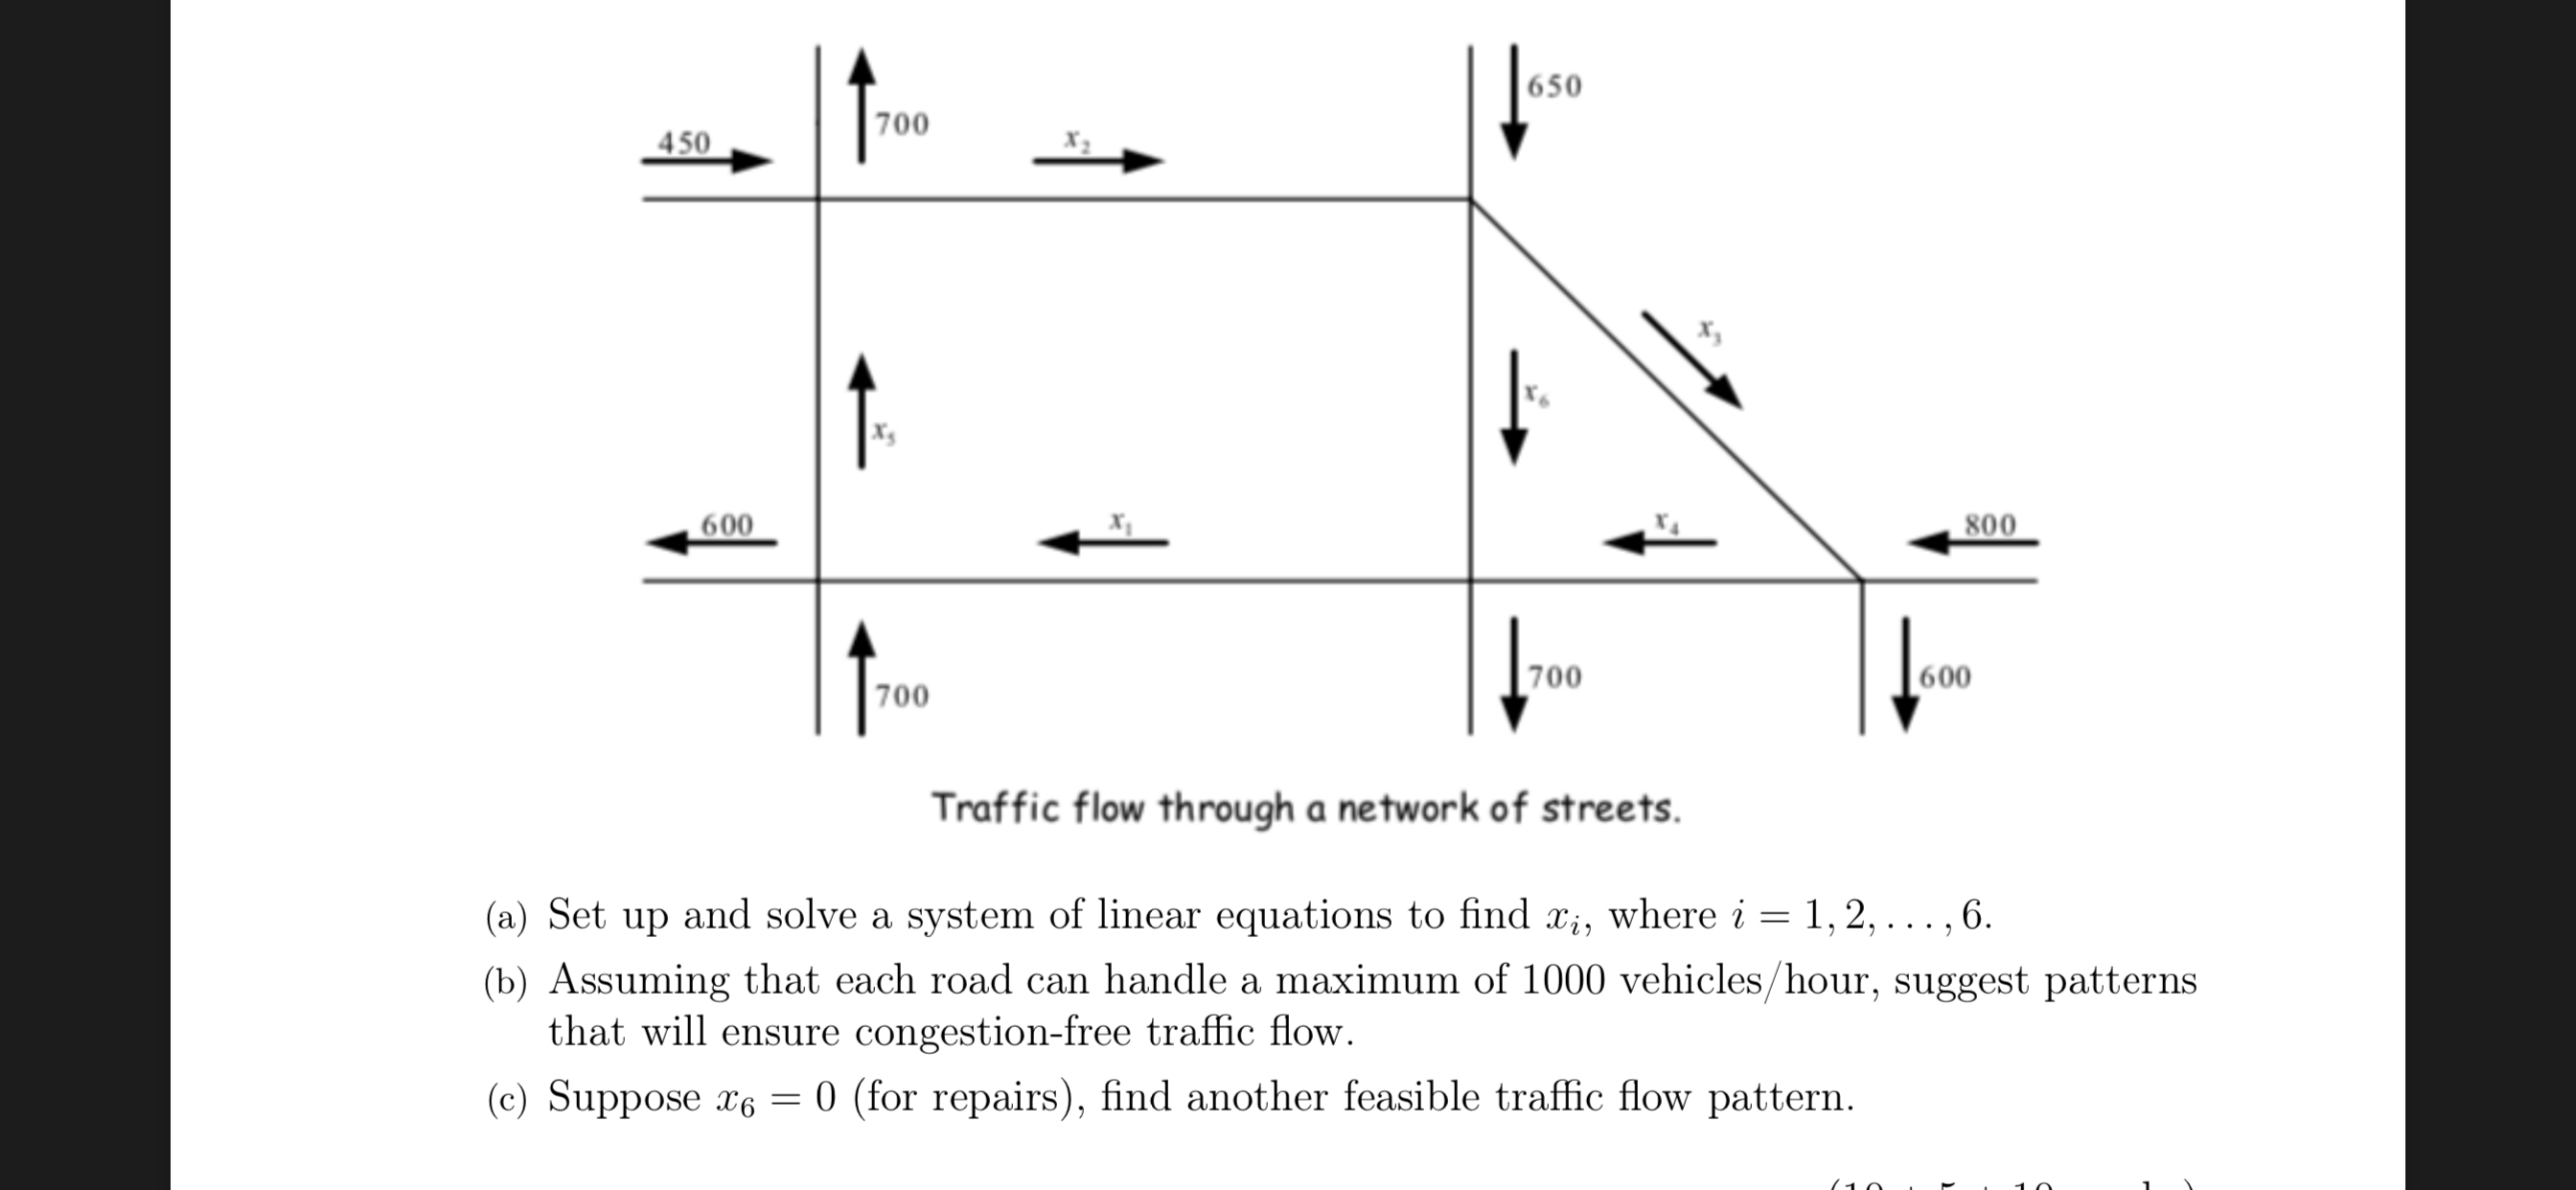 Set up and solve a system of linear equations to find x;i, where i = 1, 2, . .. , 6.
Assuming that each road can handle a maximum of 1000 vehicles/hour, suggest patterns
that will ensure congestion-free traffic flow.
Suppose x6 = 0 (for repairs), find another feasible traffic flow pattern.
